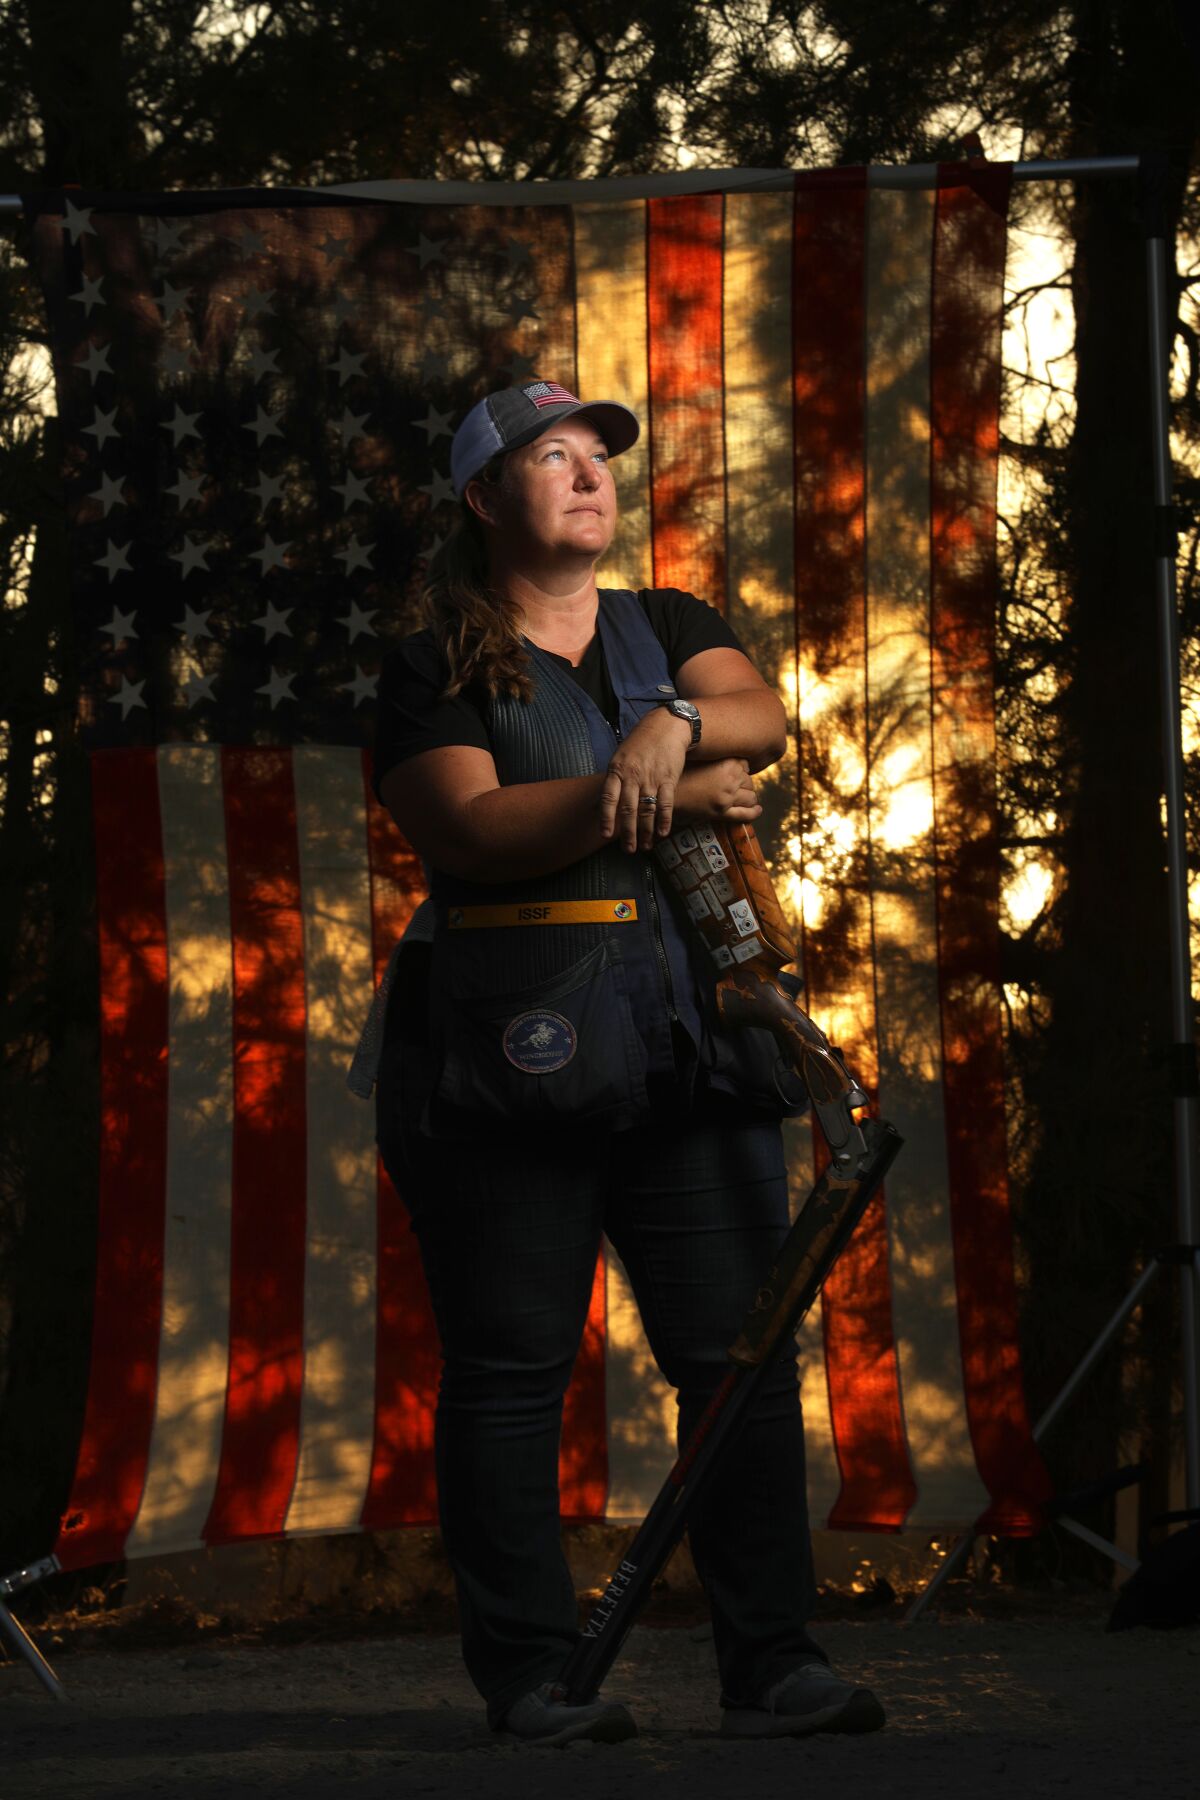 Kim Rhode, photographed at Oak Tree Gun Club in Newhall, was still in high school when she won her first Olympic medal.